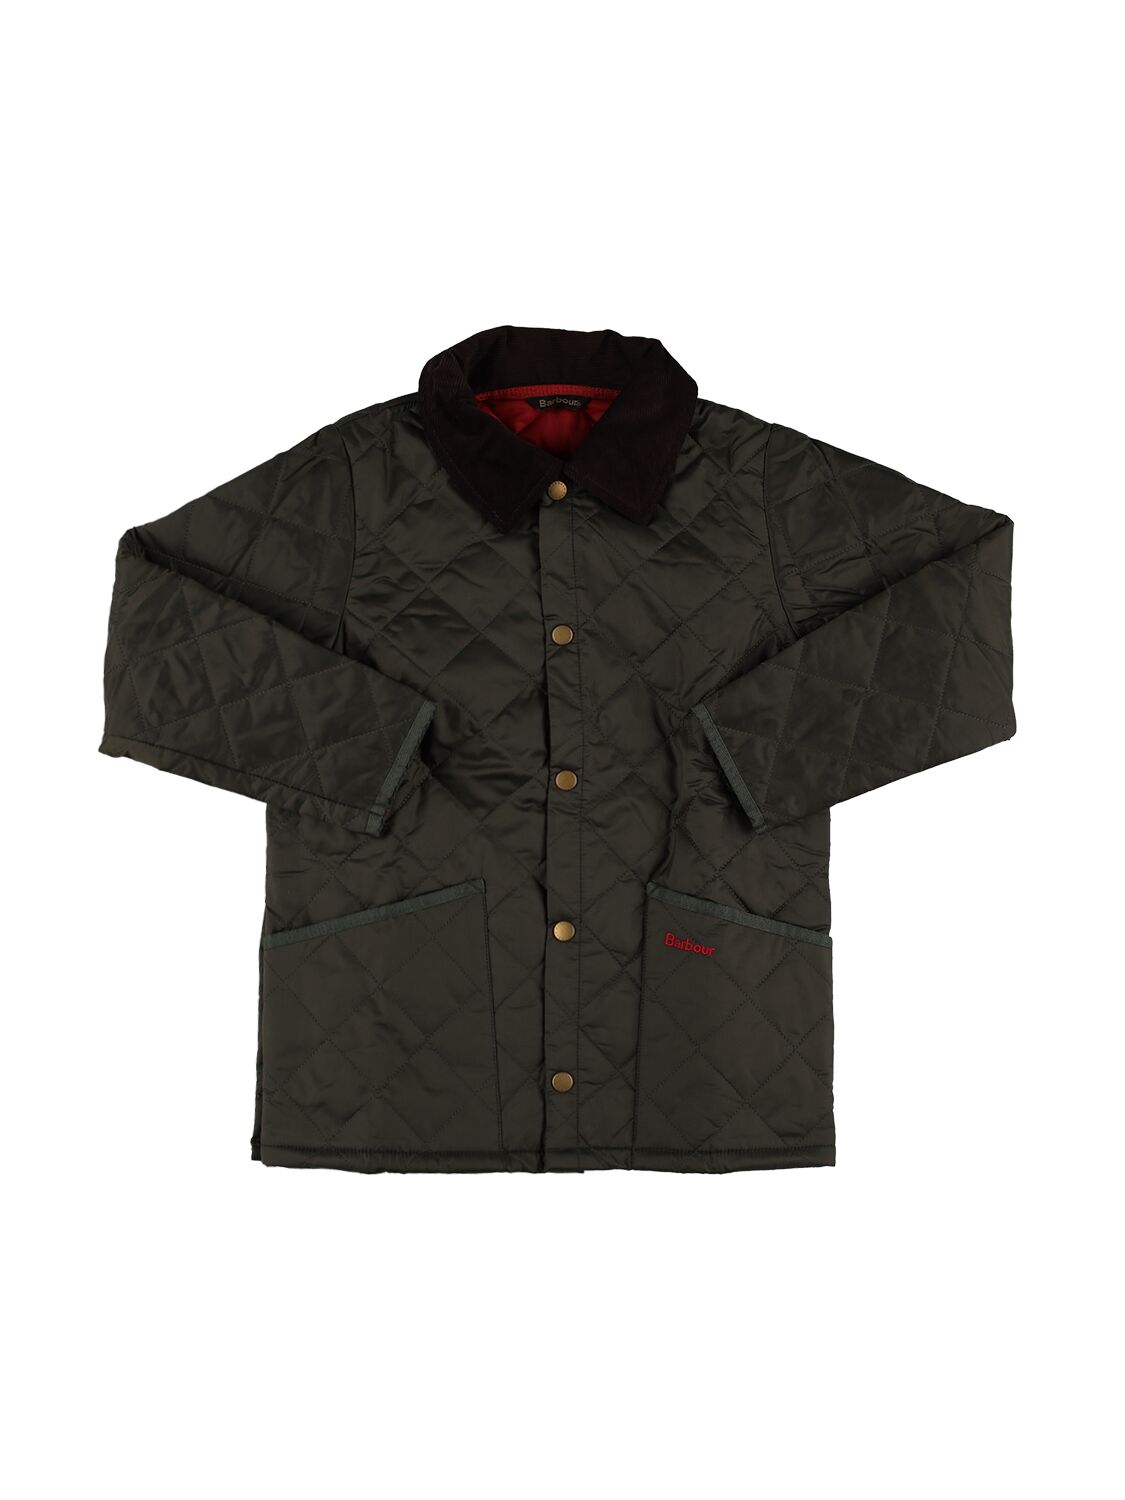 Barbour Kids' Liddesdale Quilted Puffer Jacket